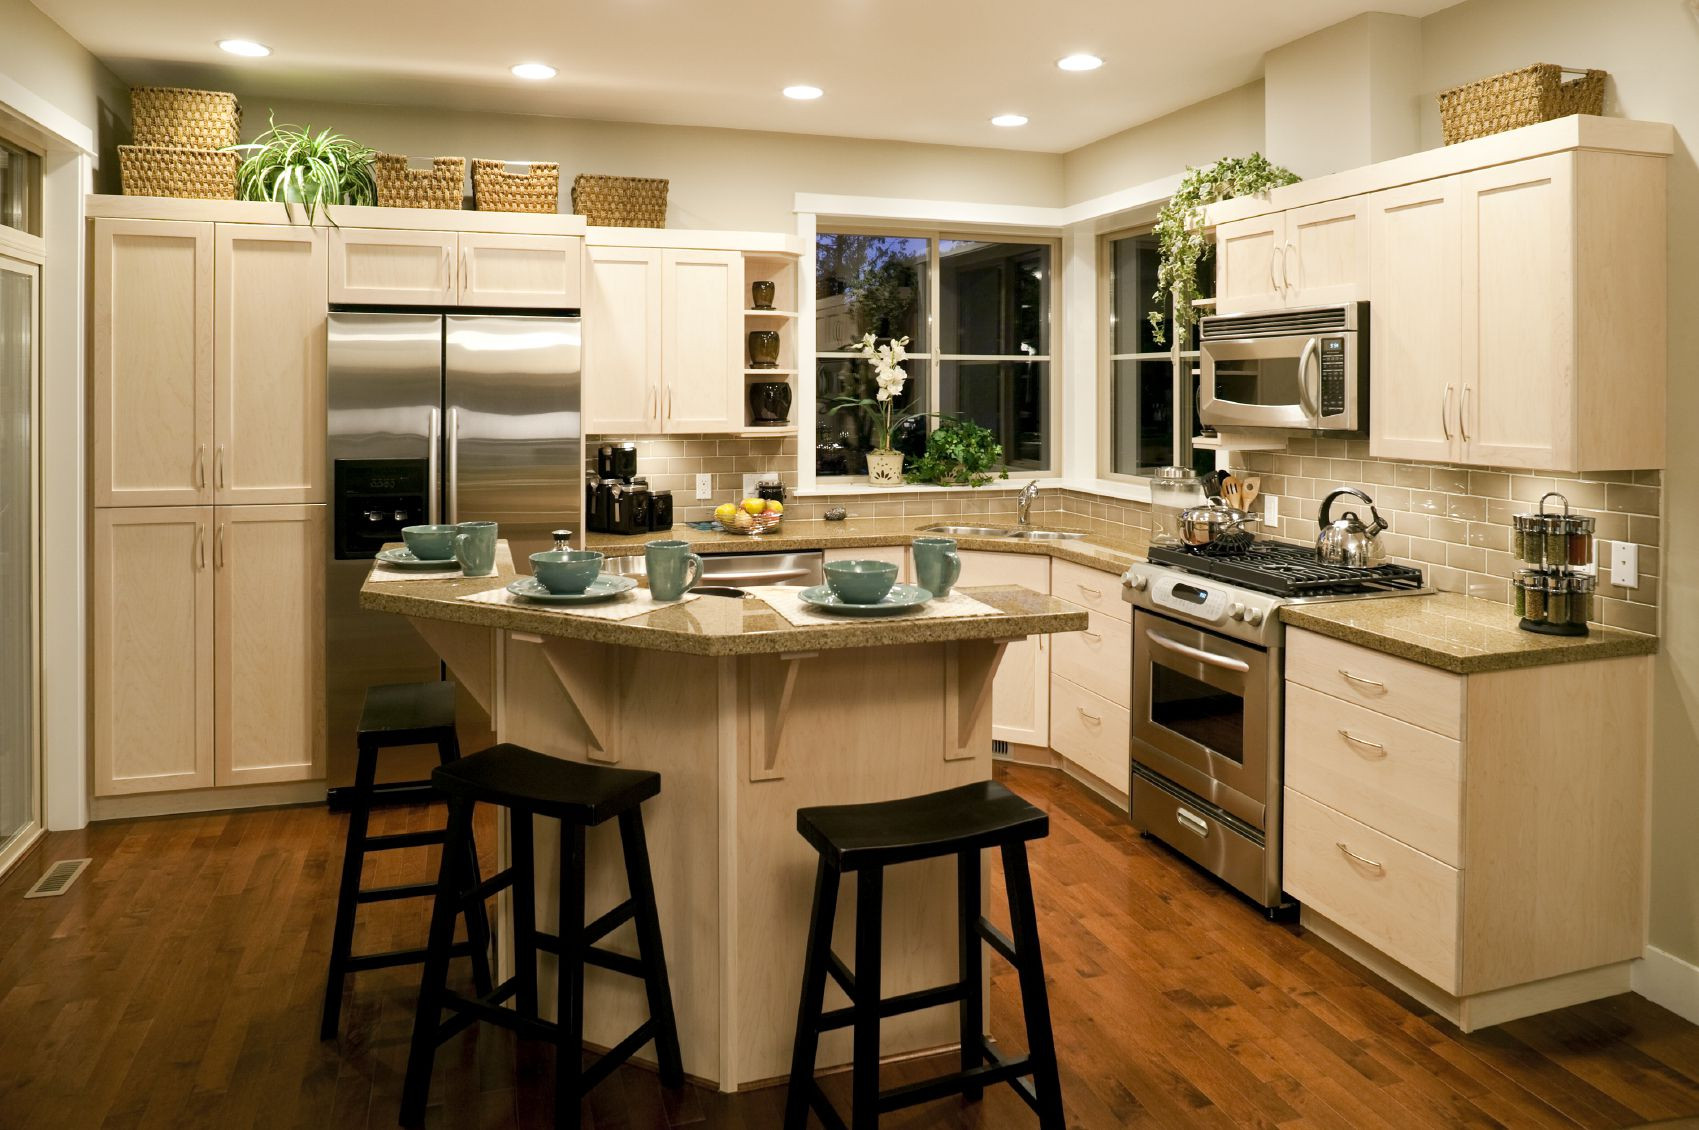 Small Kitchen Islands Design
 Awesome Kitchen Island Designs to Realize Well Designed